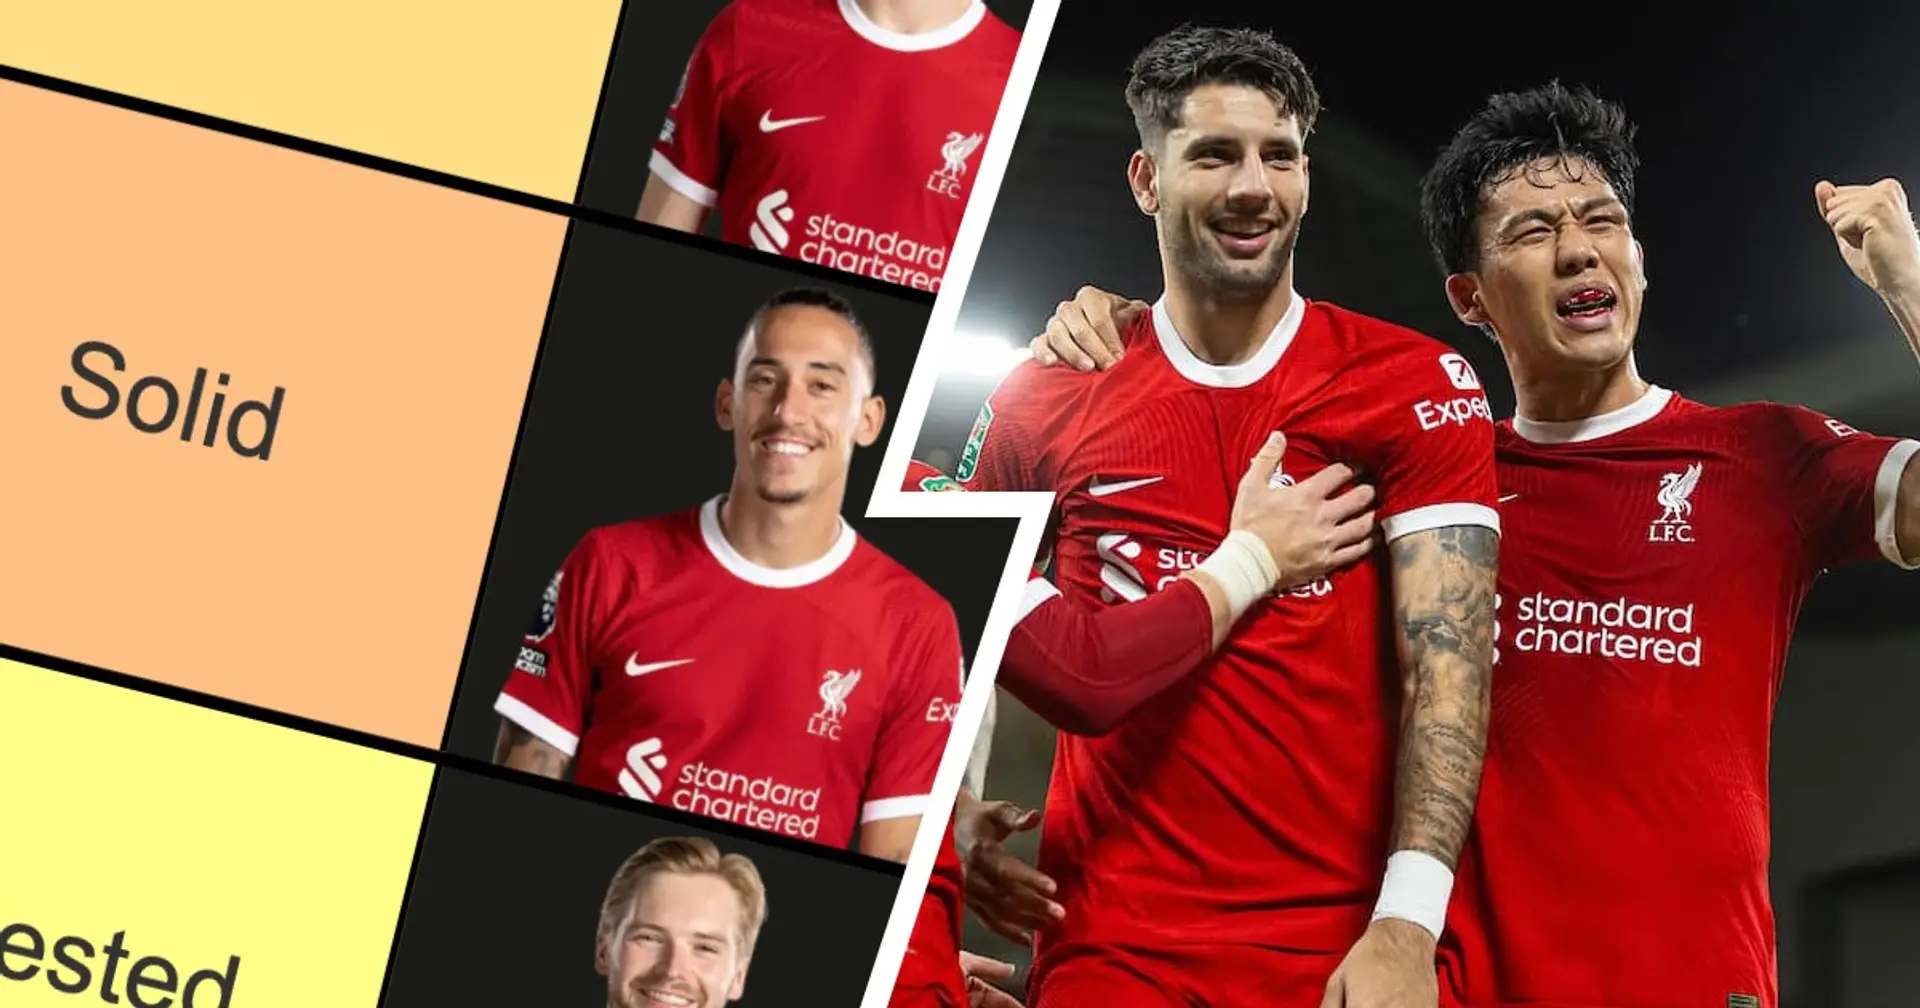 Four players 'devastating': Liverpool tierlist for Carabao Cup win over Leicester City